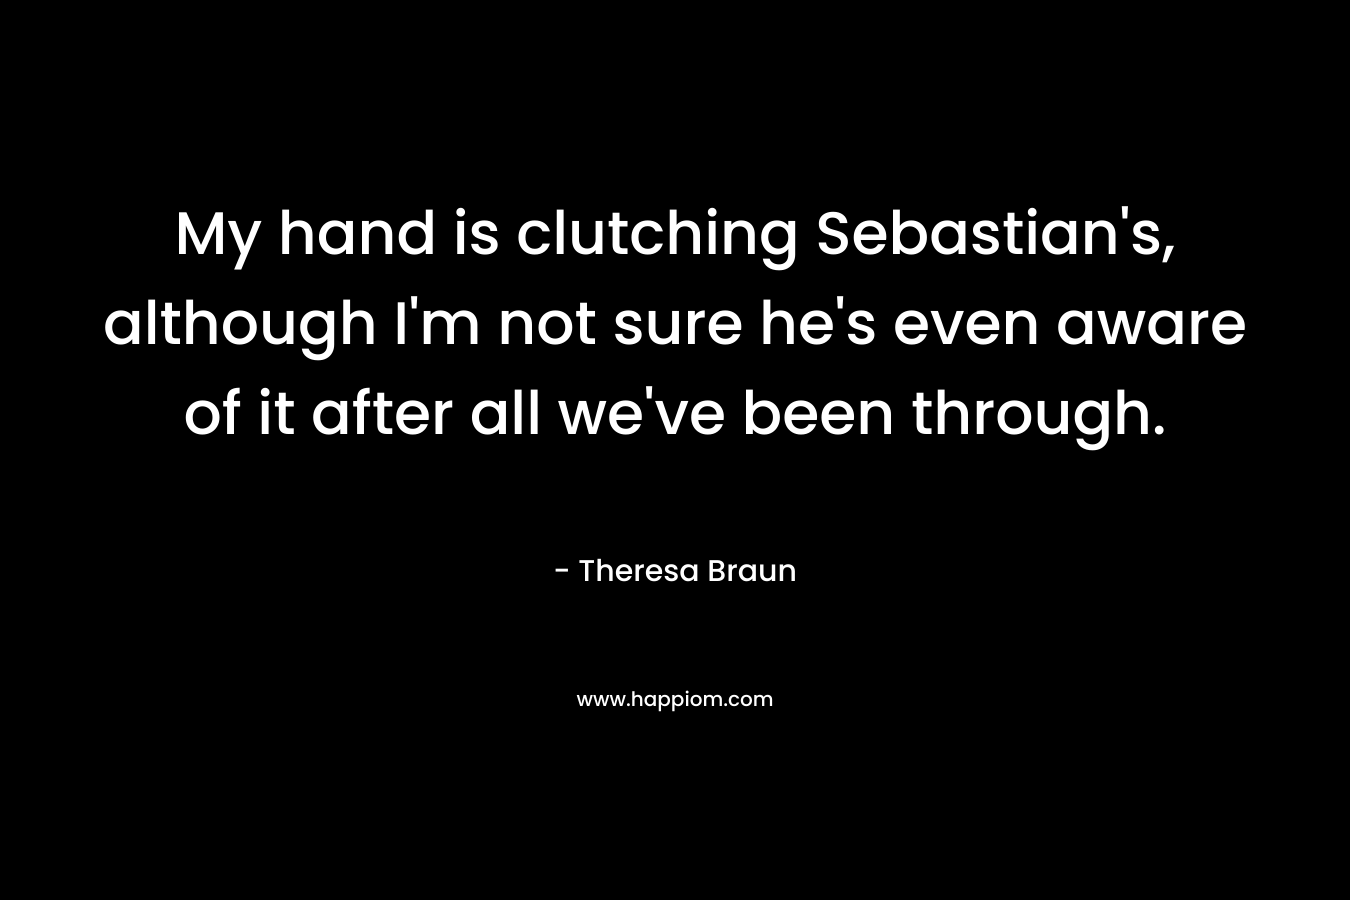 My hand is clutching Sebastian's, although I'm not sure he's even aware of it after all we've been through.